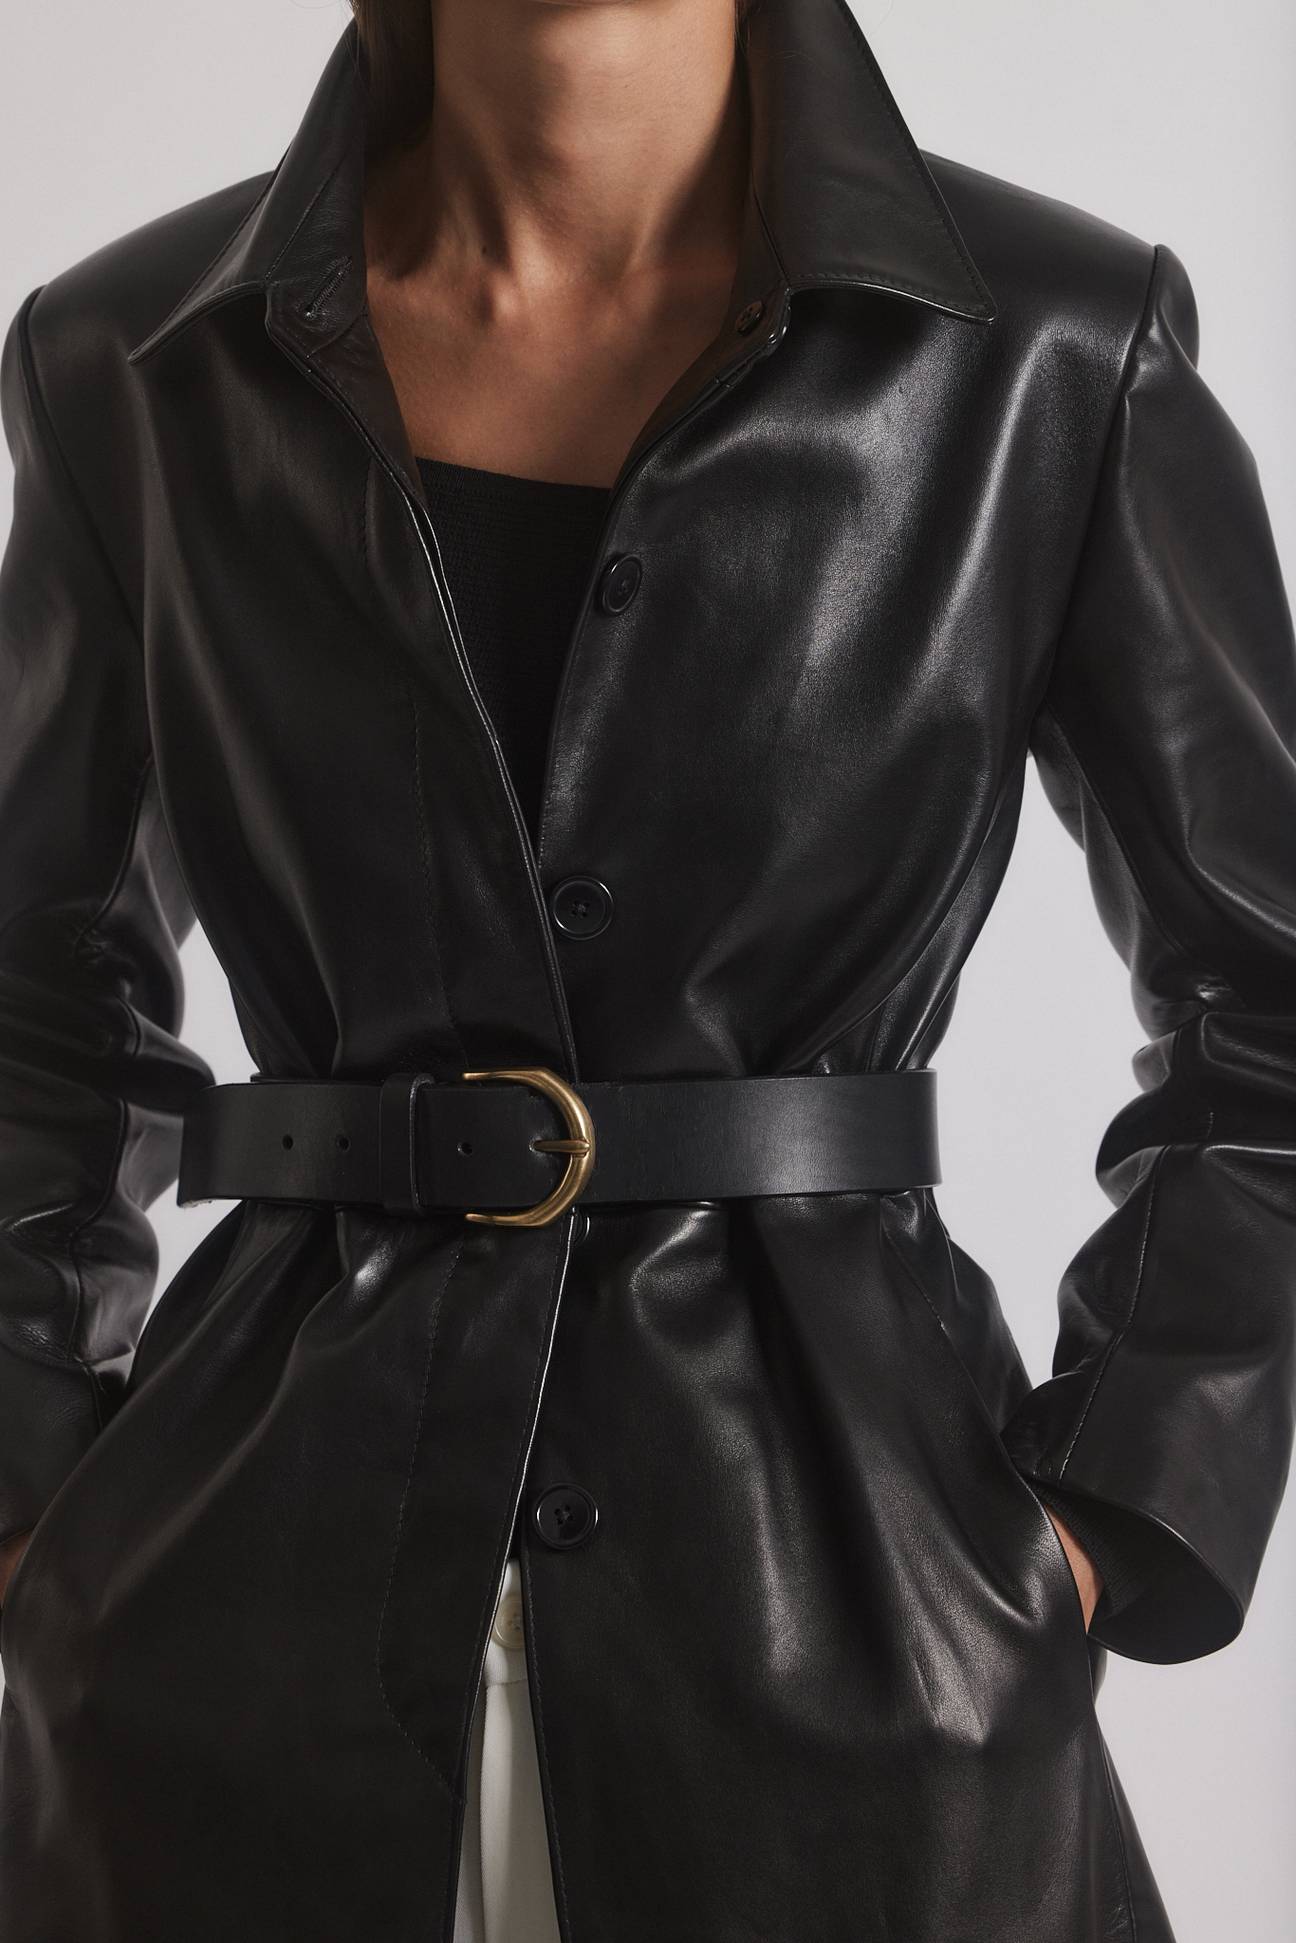 The Janessa Leone Cato Belt in Black available at The New Trend Australia